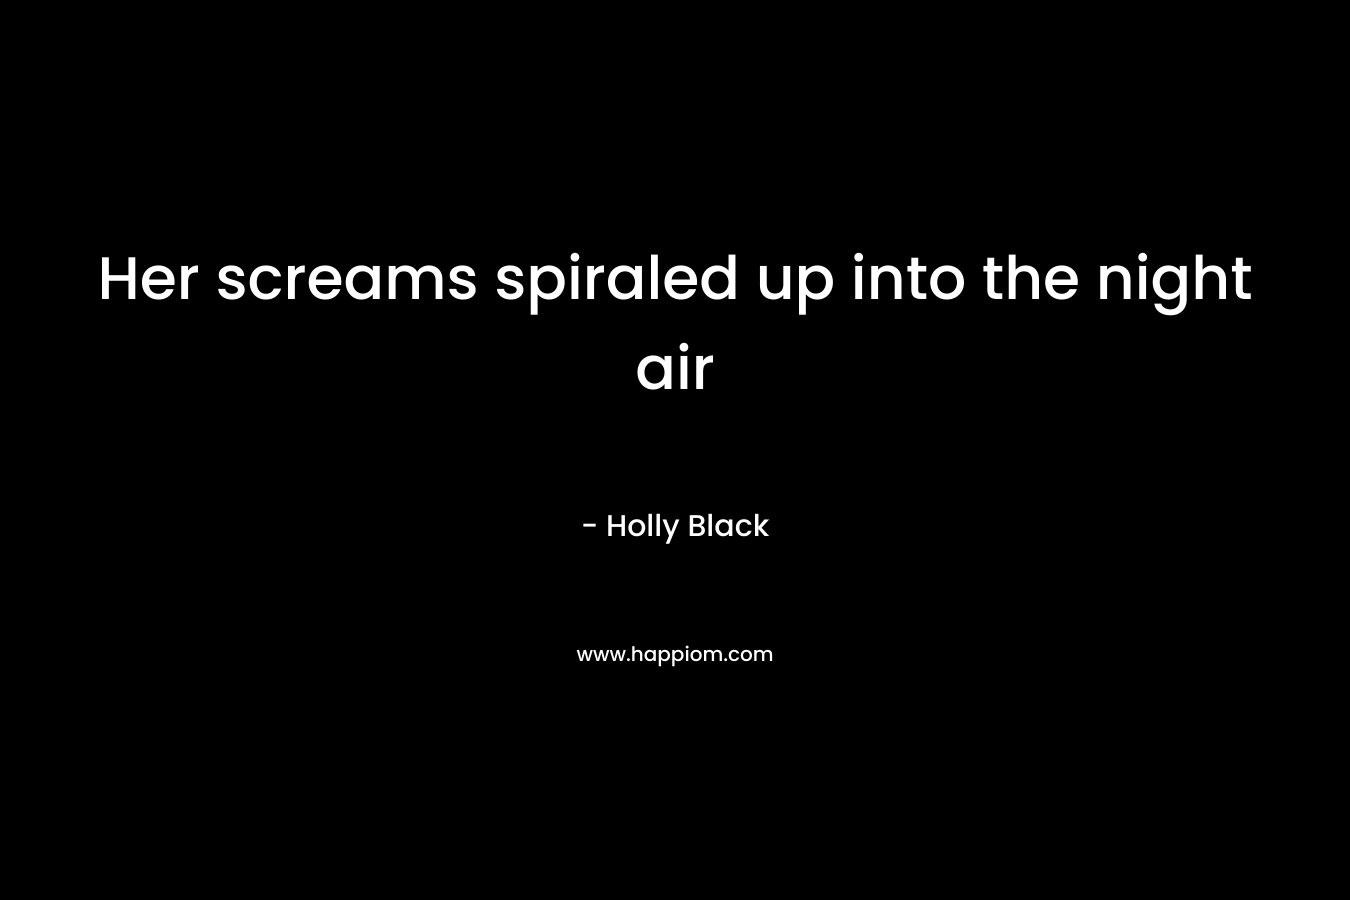 Her screams spiraled up into the night air – Holly Black